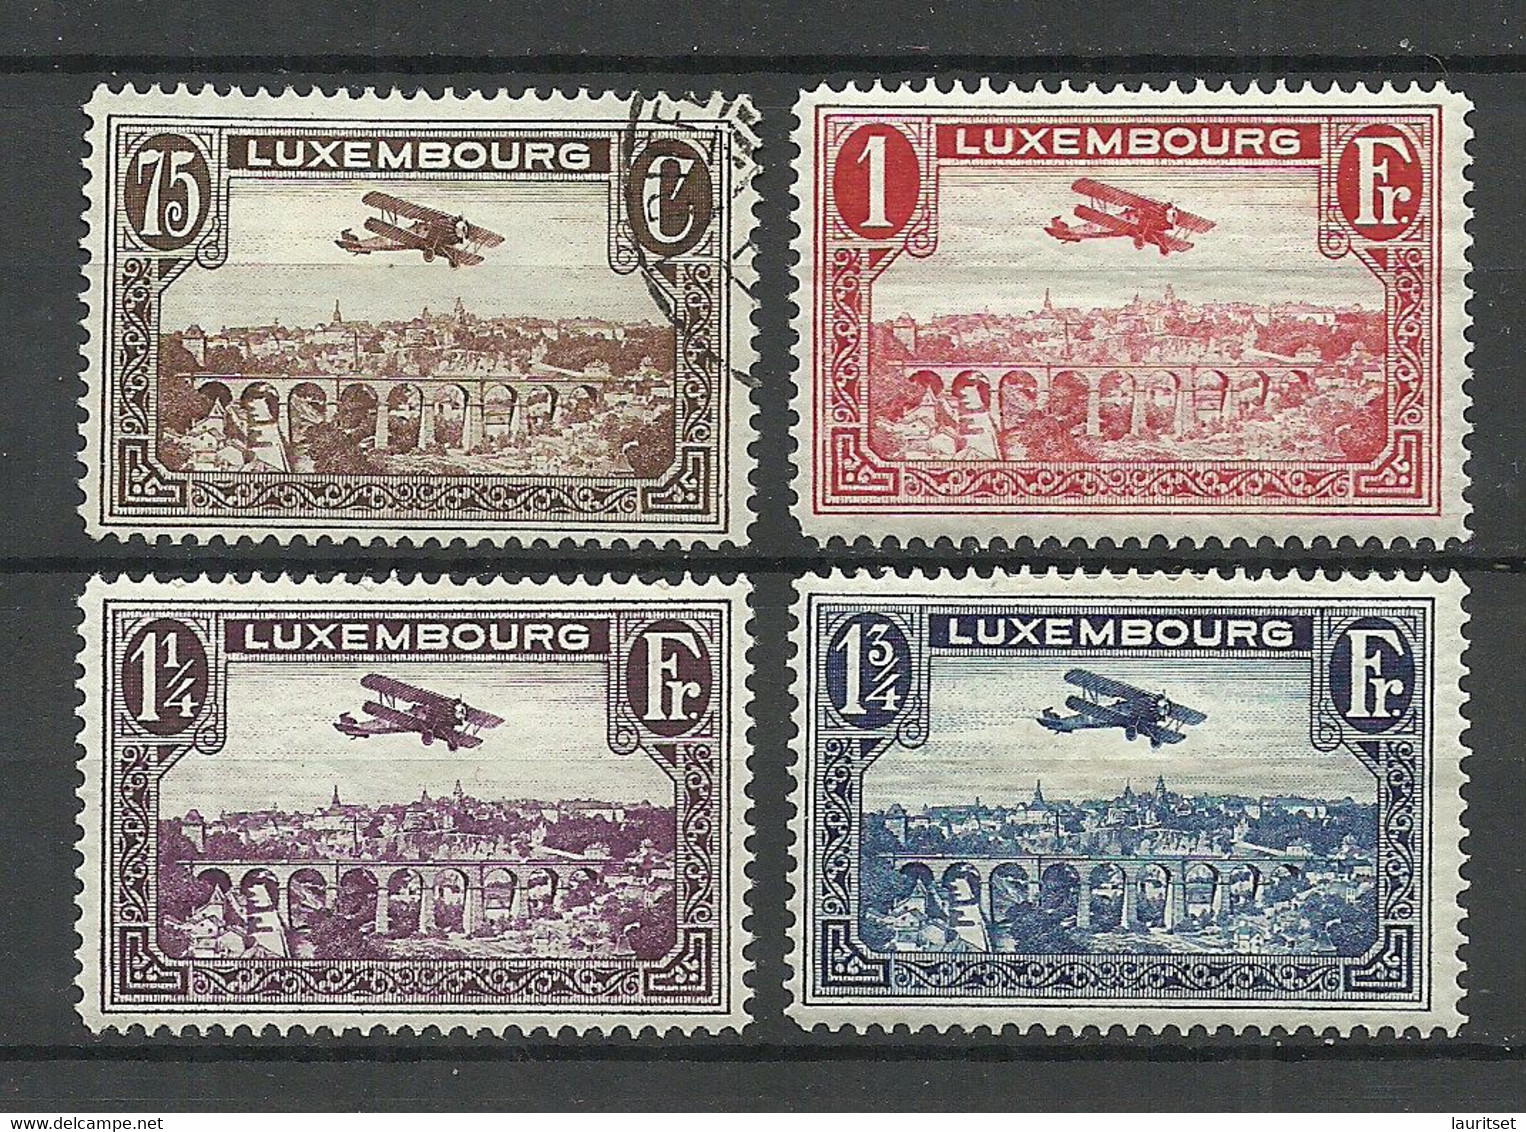 LUXEMBOURG Luxemburg 1931 Michel 234 - 237 */o Flugpost Air Mail Air Plane Doppeldecker - Usados